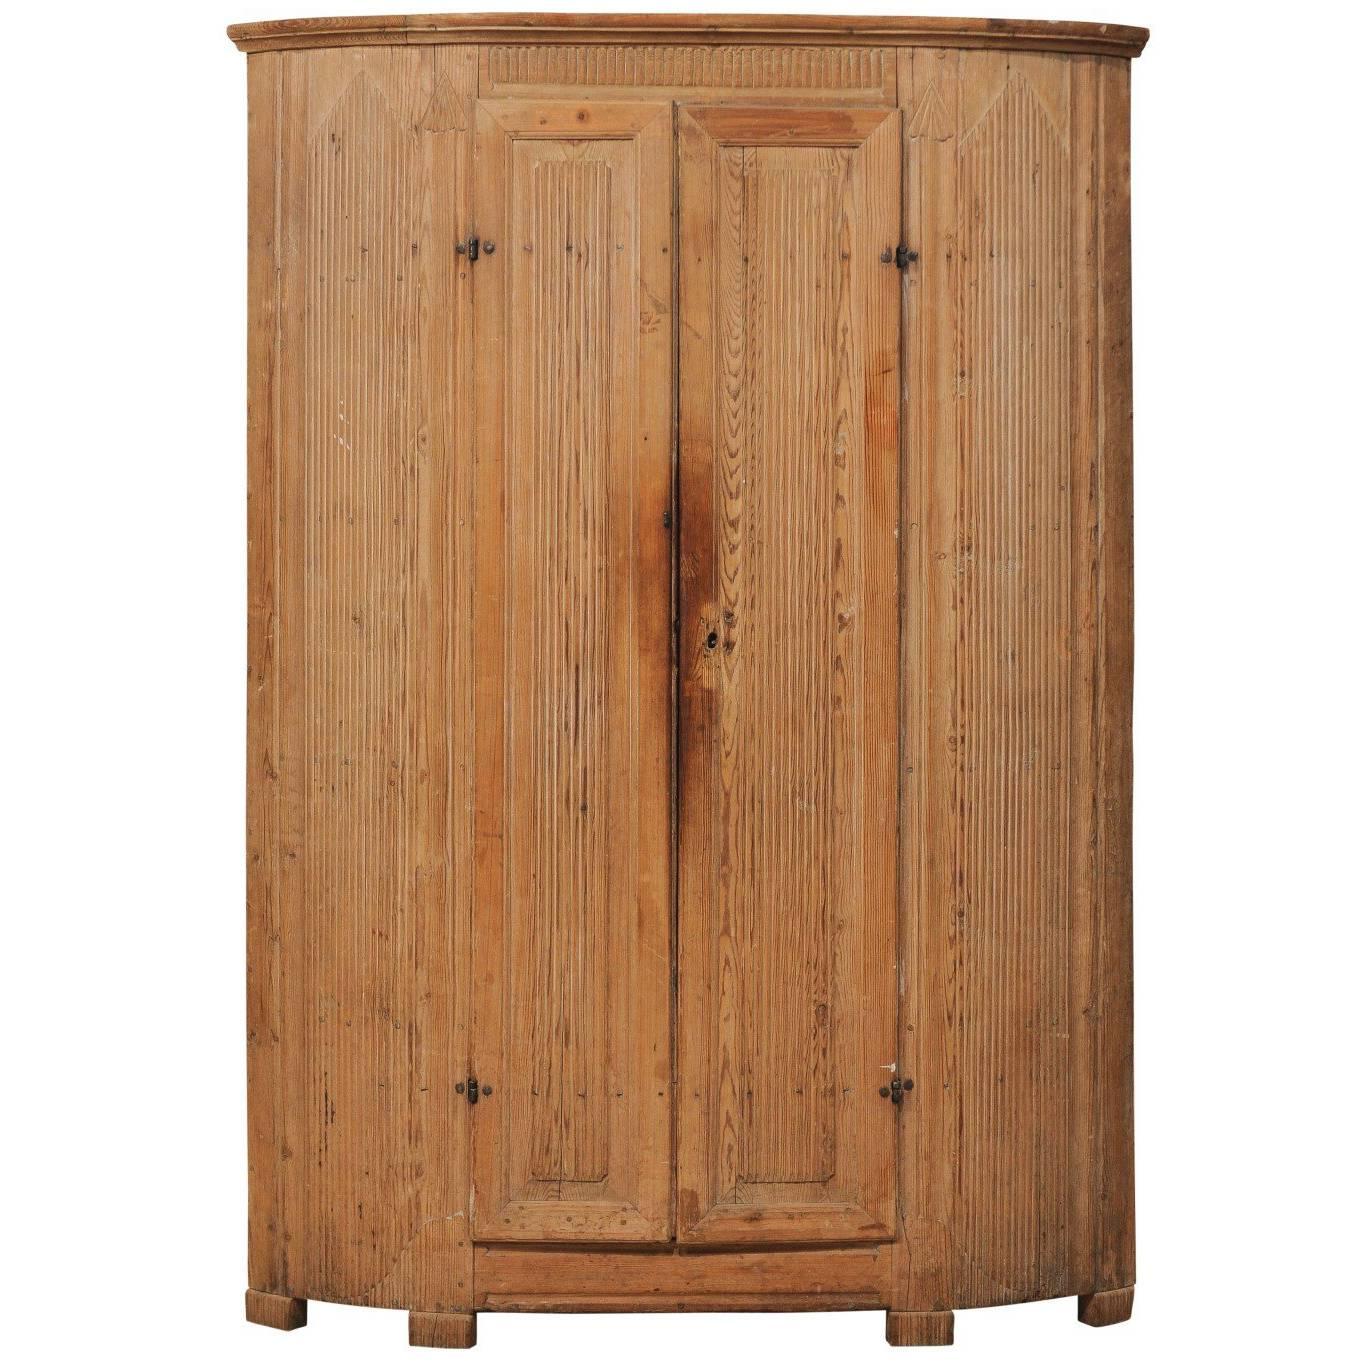 19th Century Period Gustavian Corner Cabinet, Vertical Reeds and Natural Wood For Sale